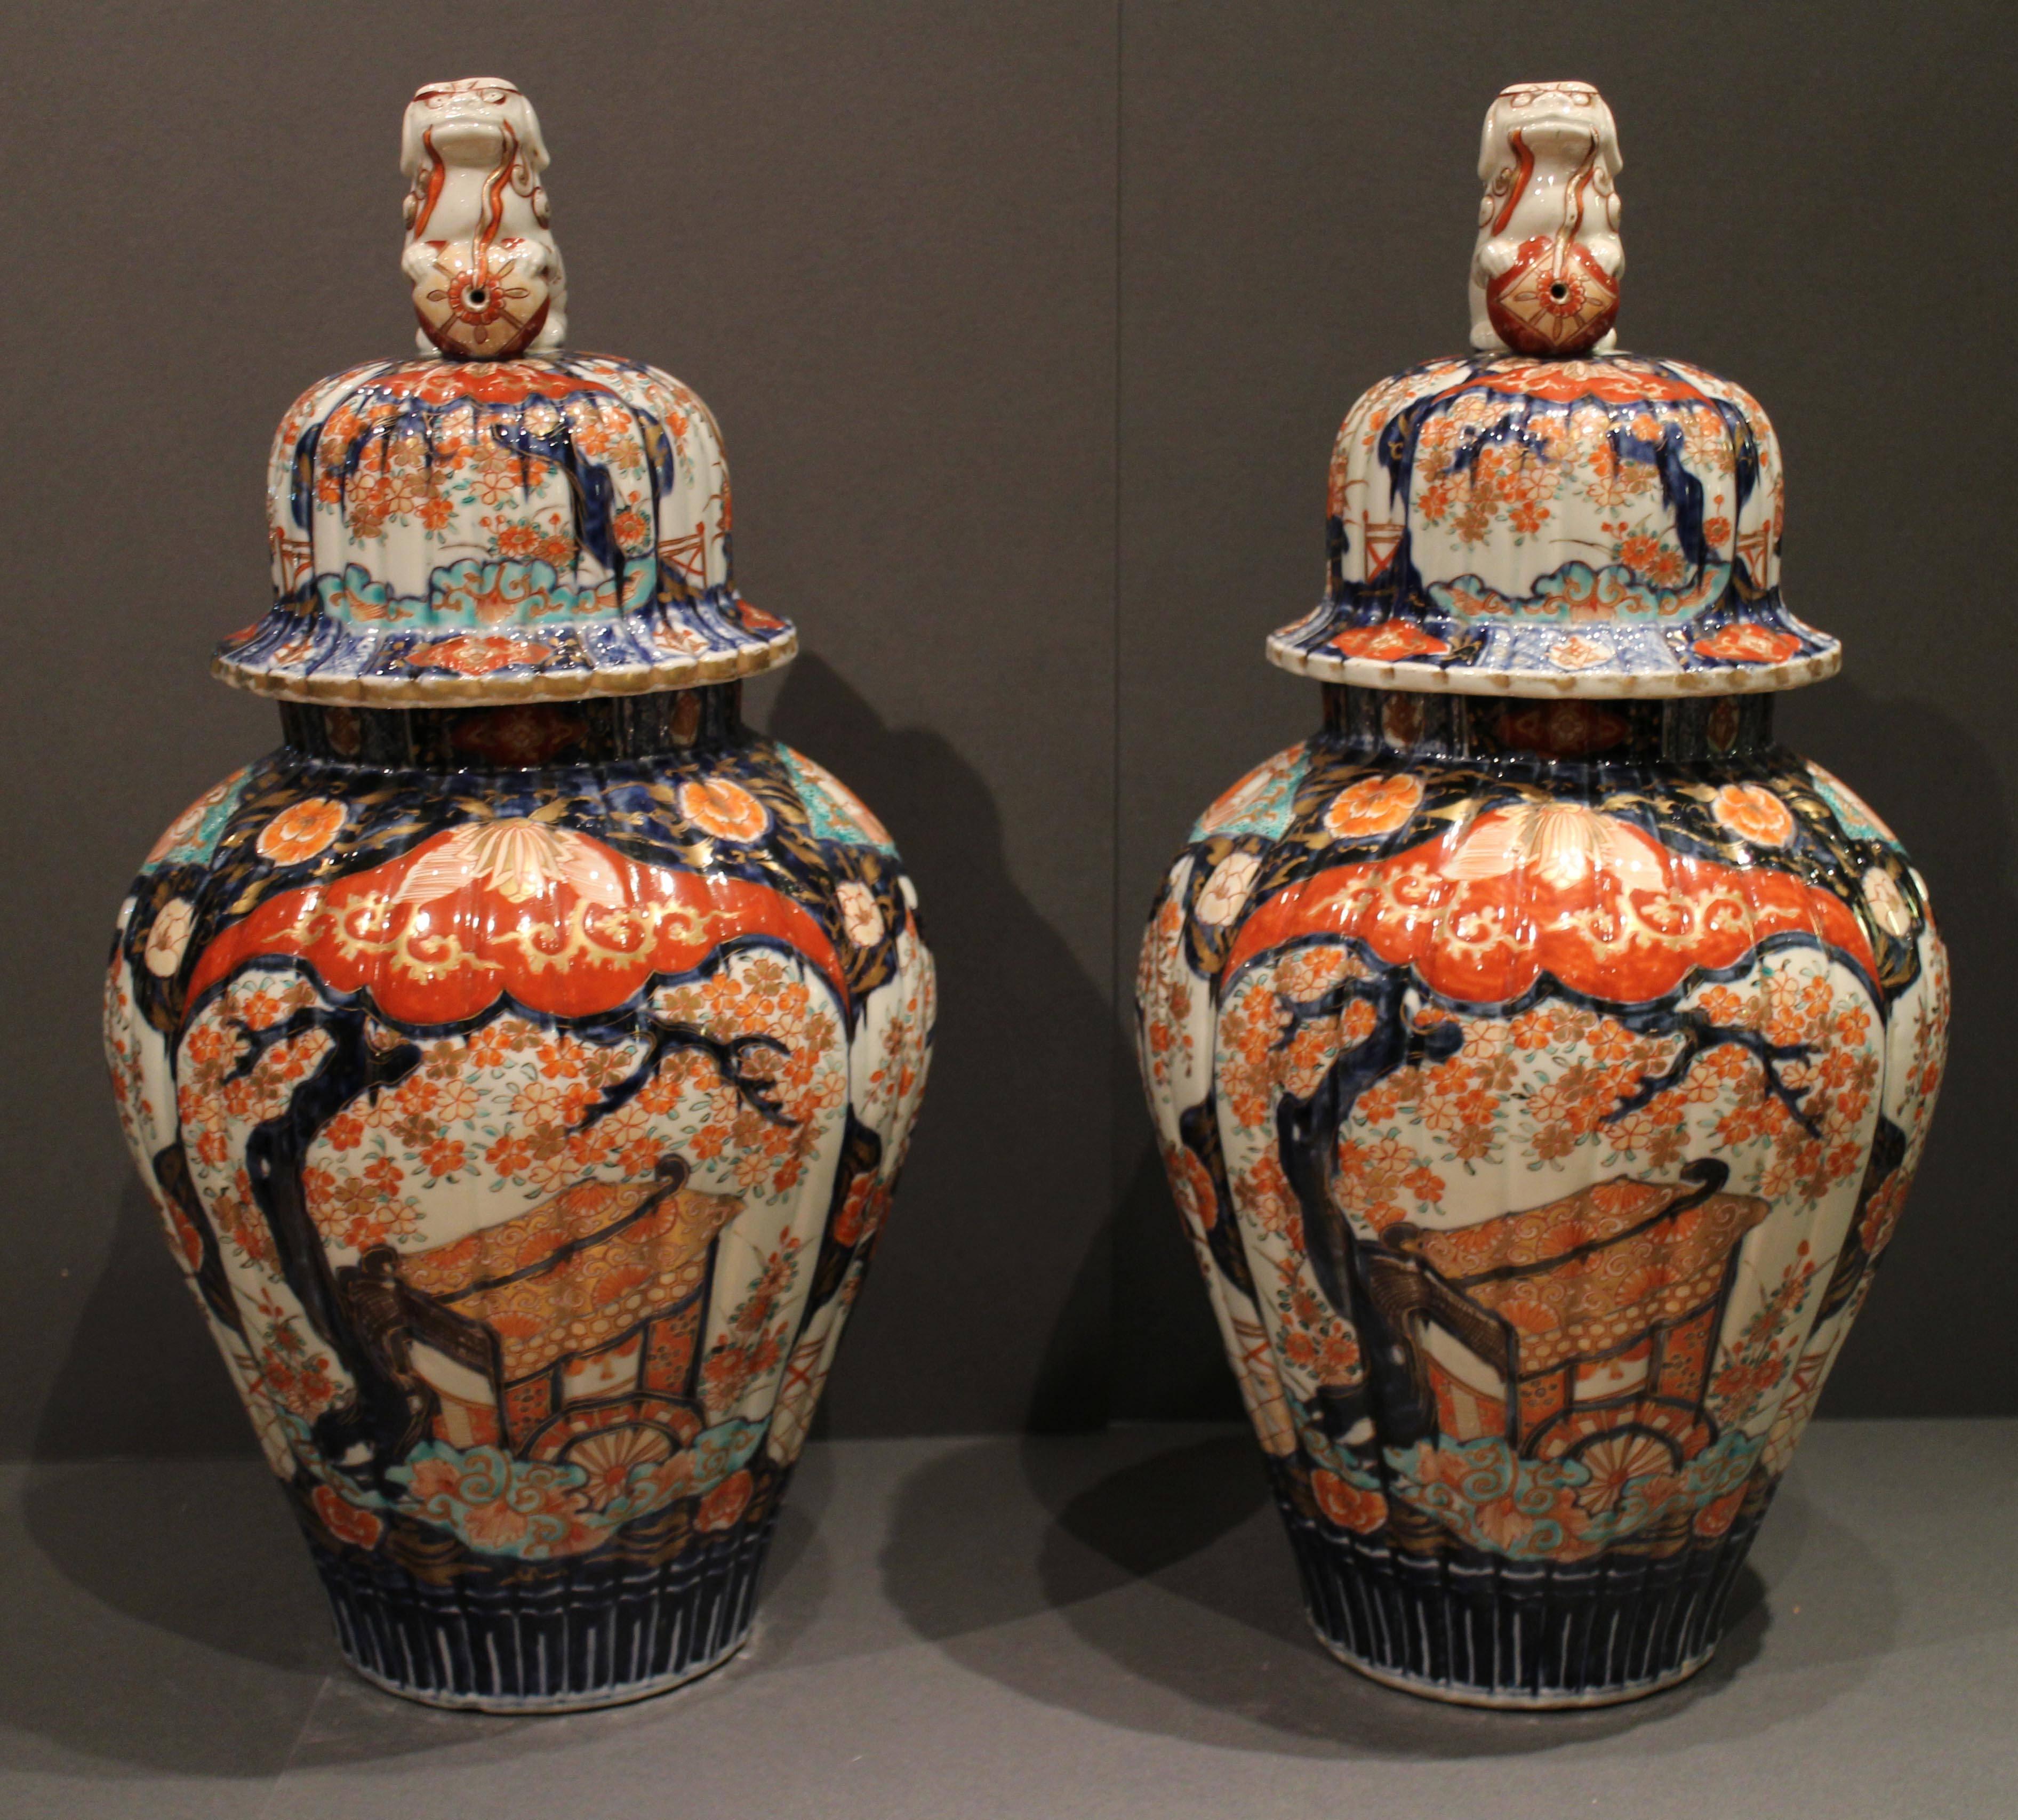 A pair of antique Japanese Imari vases and covers decorated with large shi shi dogs with balls, the vases are decorated in blue and orange with traditional Japanese scenes of flower arrangements and flowering blossom trees.